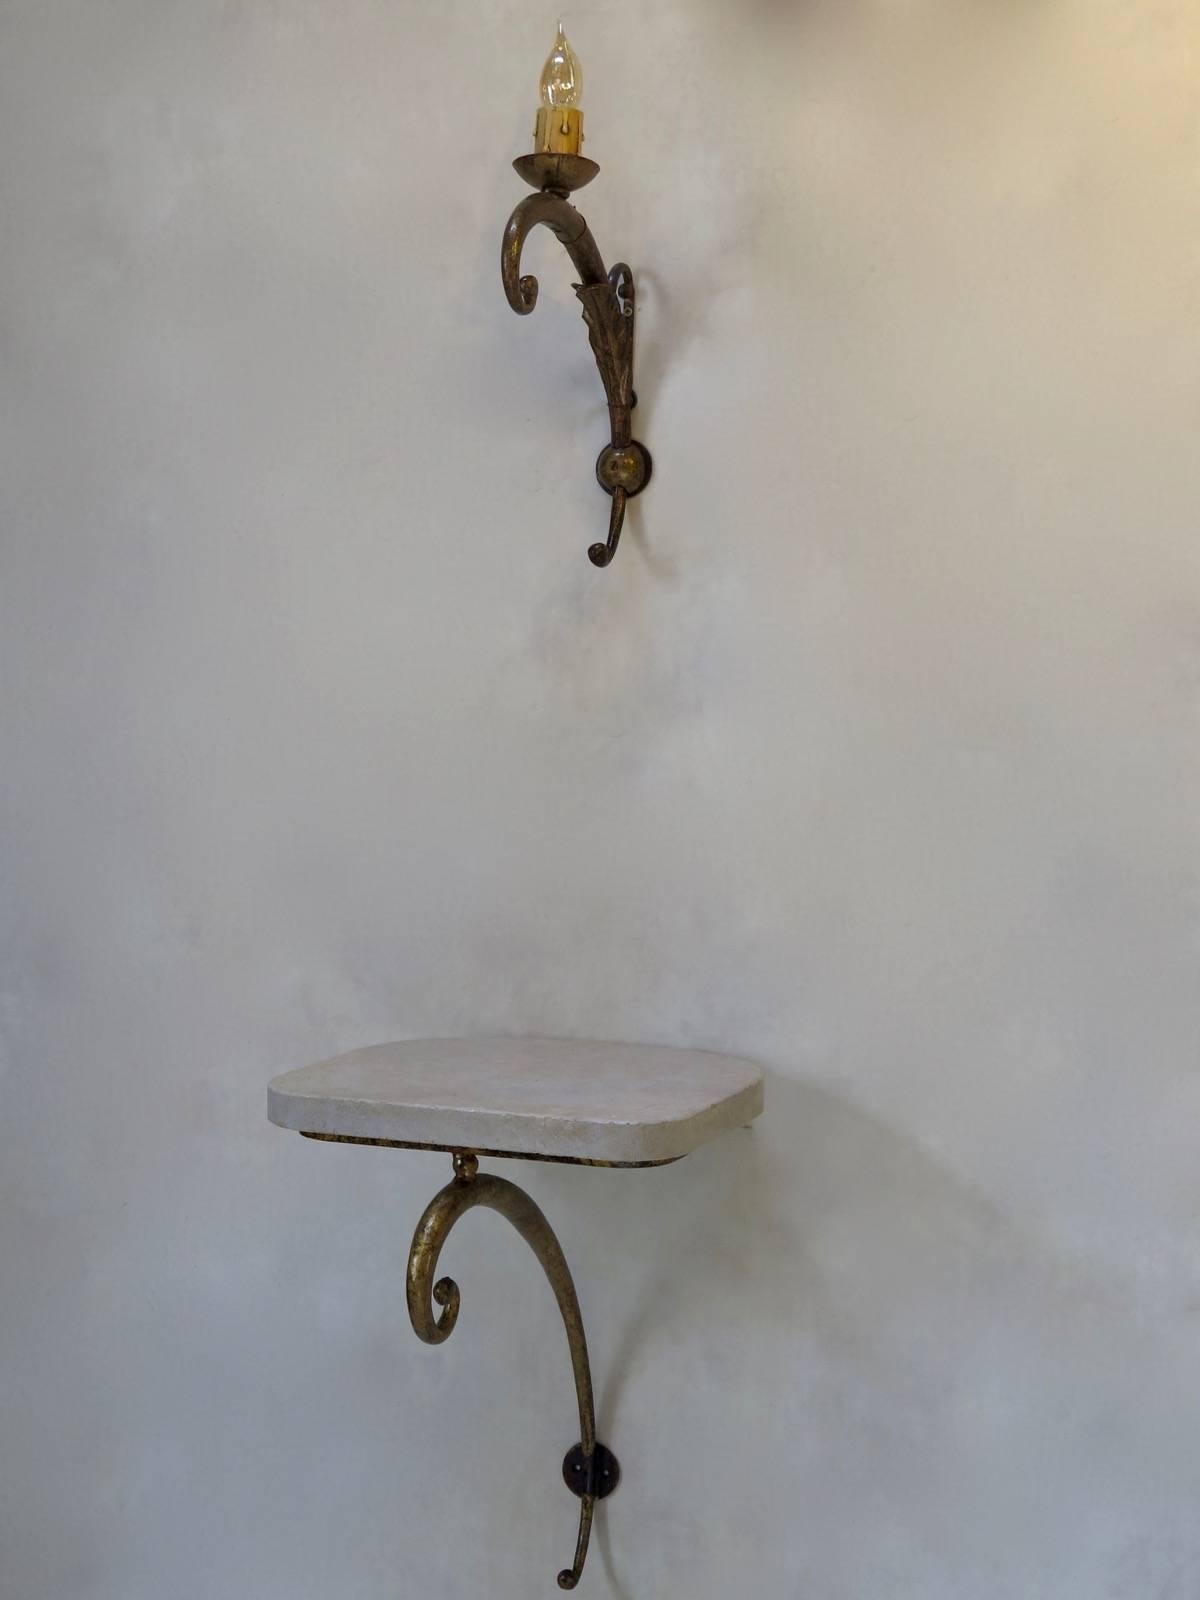 A double pair of wall lights and consoles or wall brackets. The structures are made of gilded wrought iron. The console tops are travertine.

Dimensions given below are for the wall brackets. The sconces measure:

Height 34 cm - 13.38 in
Width